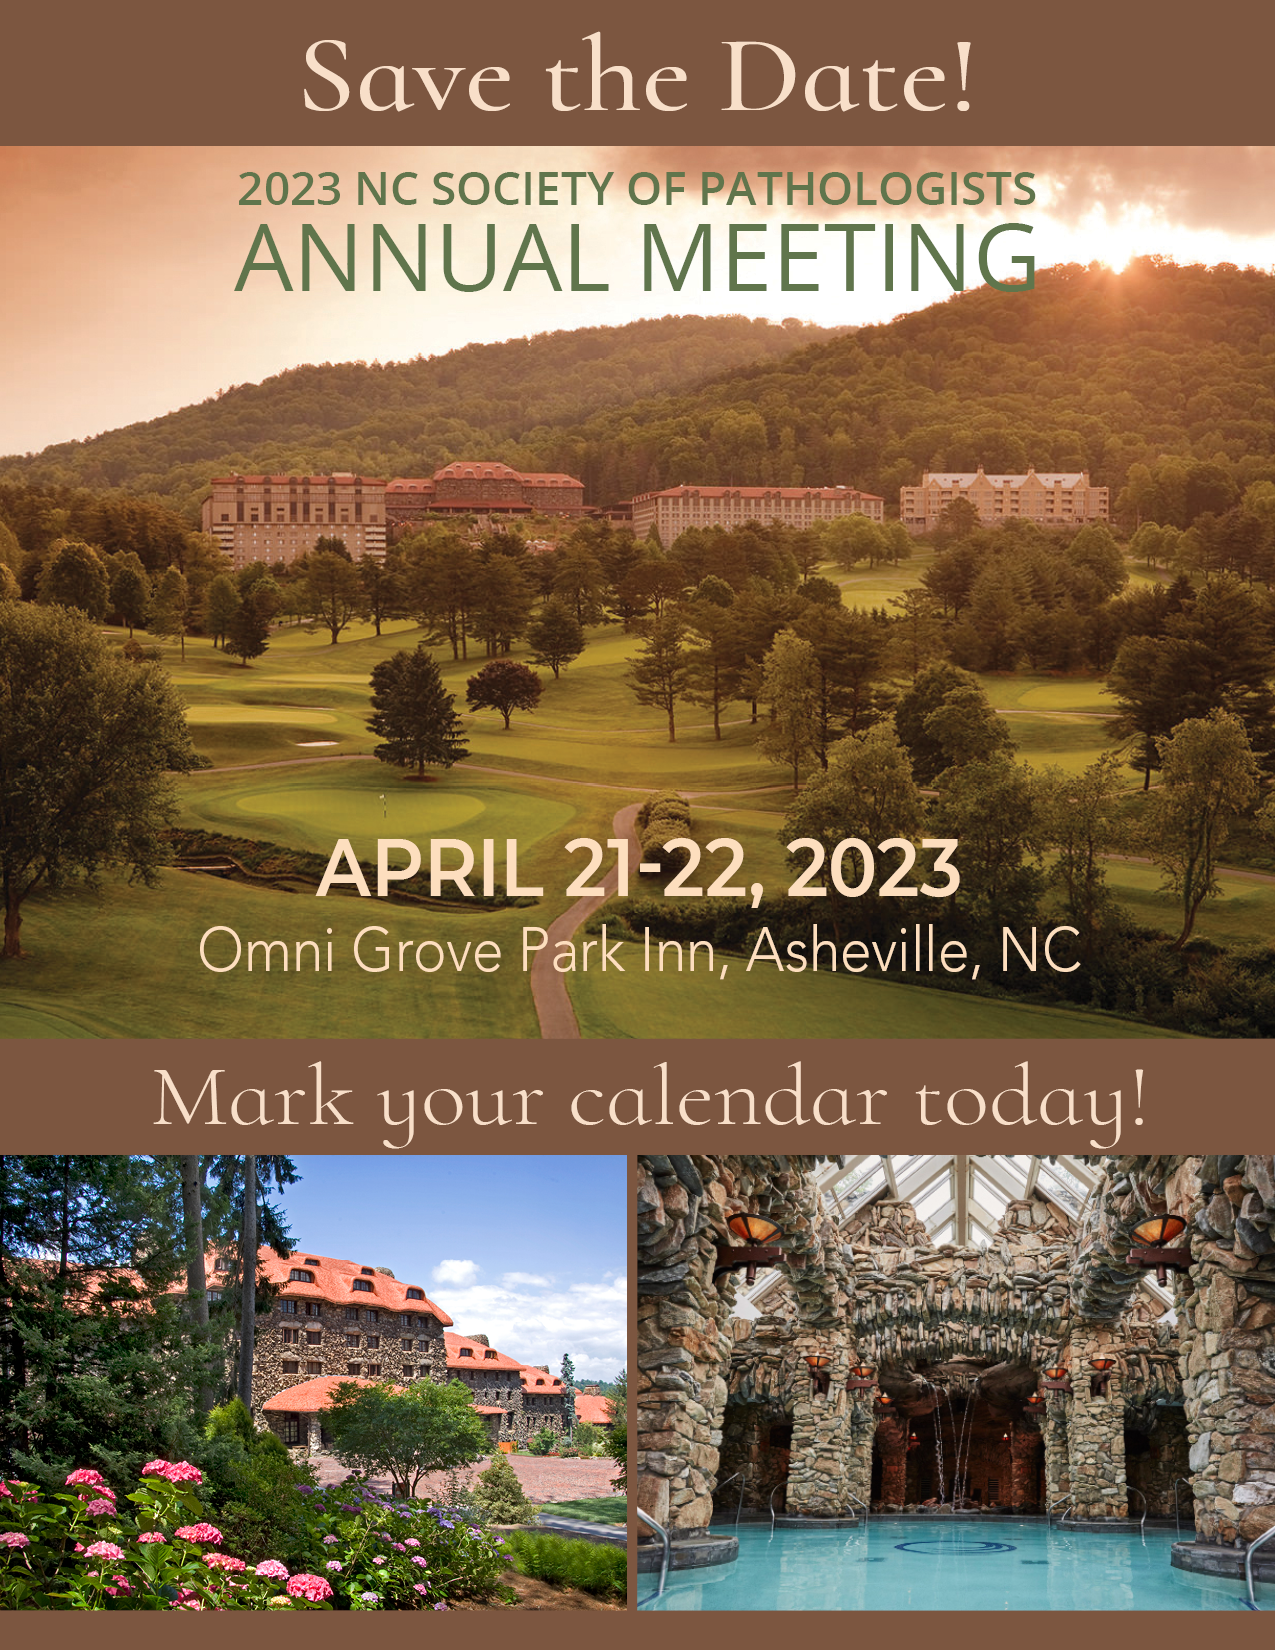 Save the date for the 2023 NCSP Annual Meeting - April 21-22